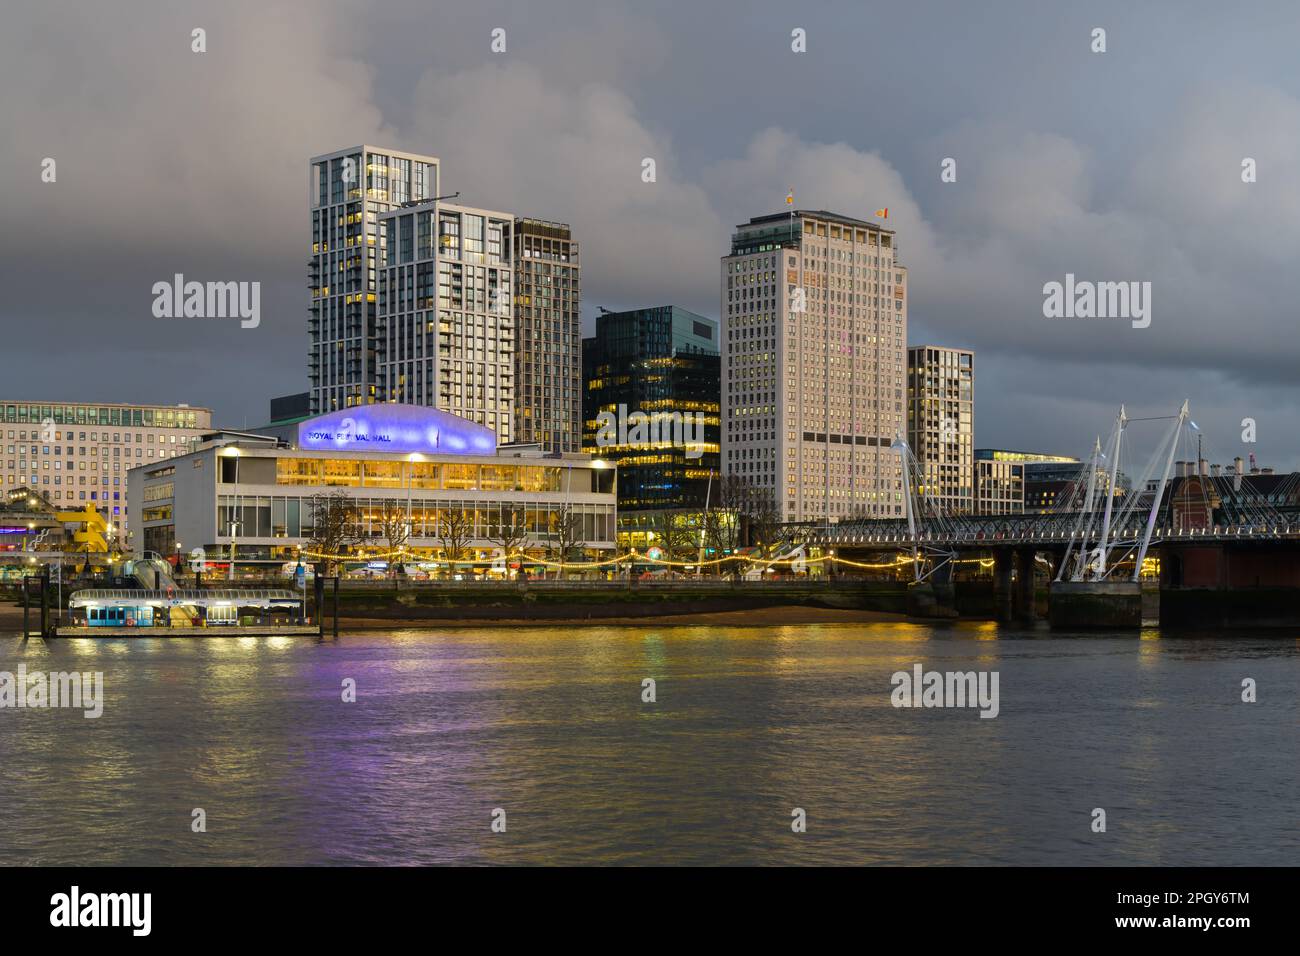 London, UK - March 18, 2023; Royal Festival Hall and Shell Center on South Bank of River Thames London Stock Photo